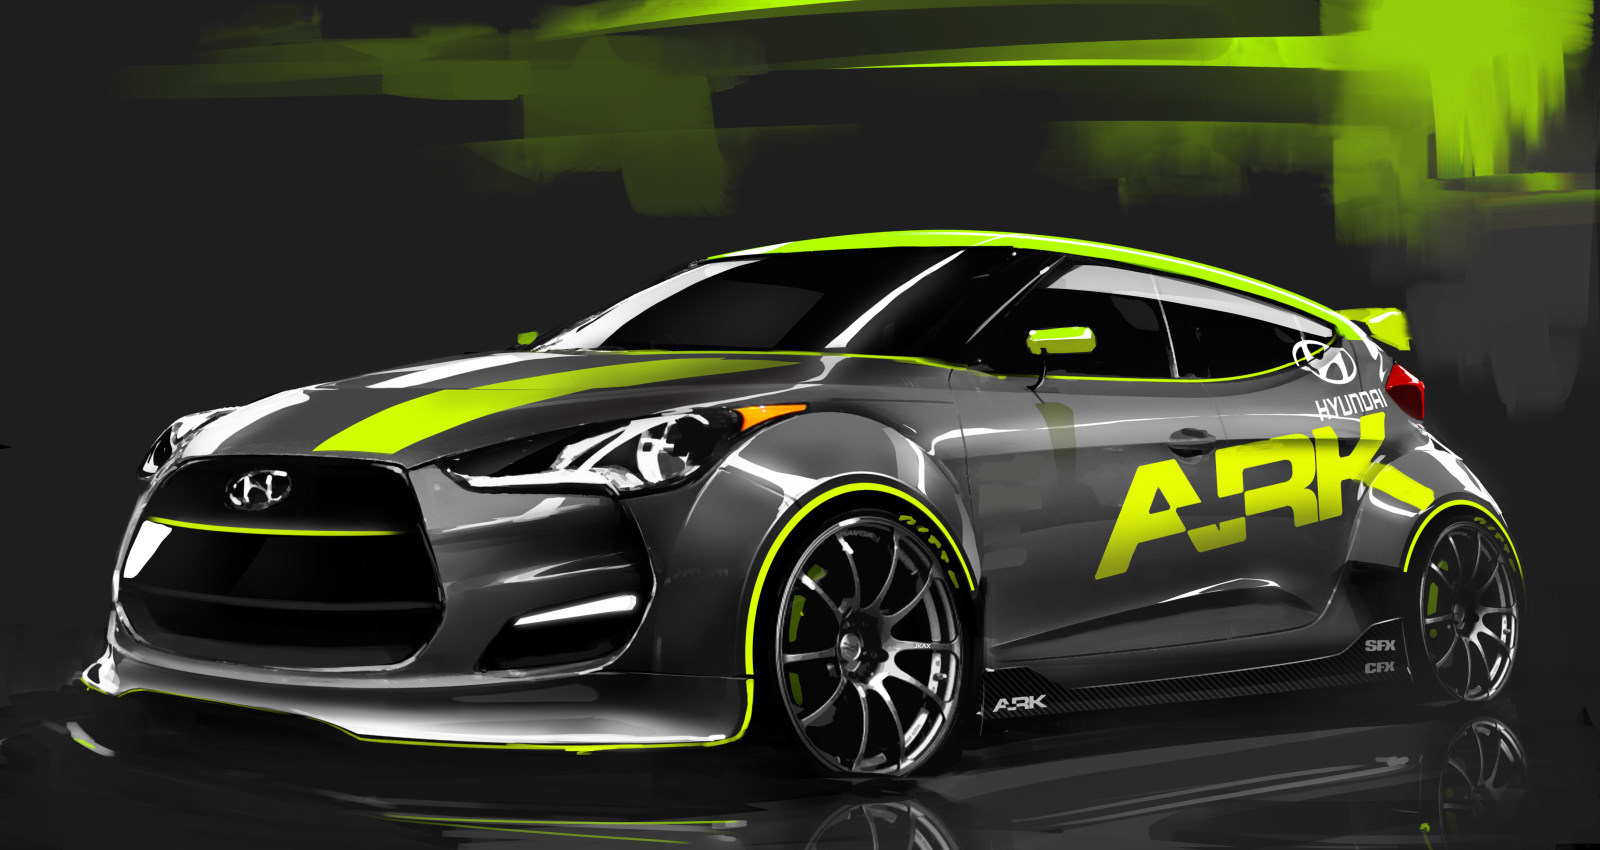 Hyundai Image Veloster Turbo HD Wallpaper And Background